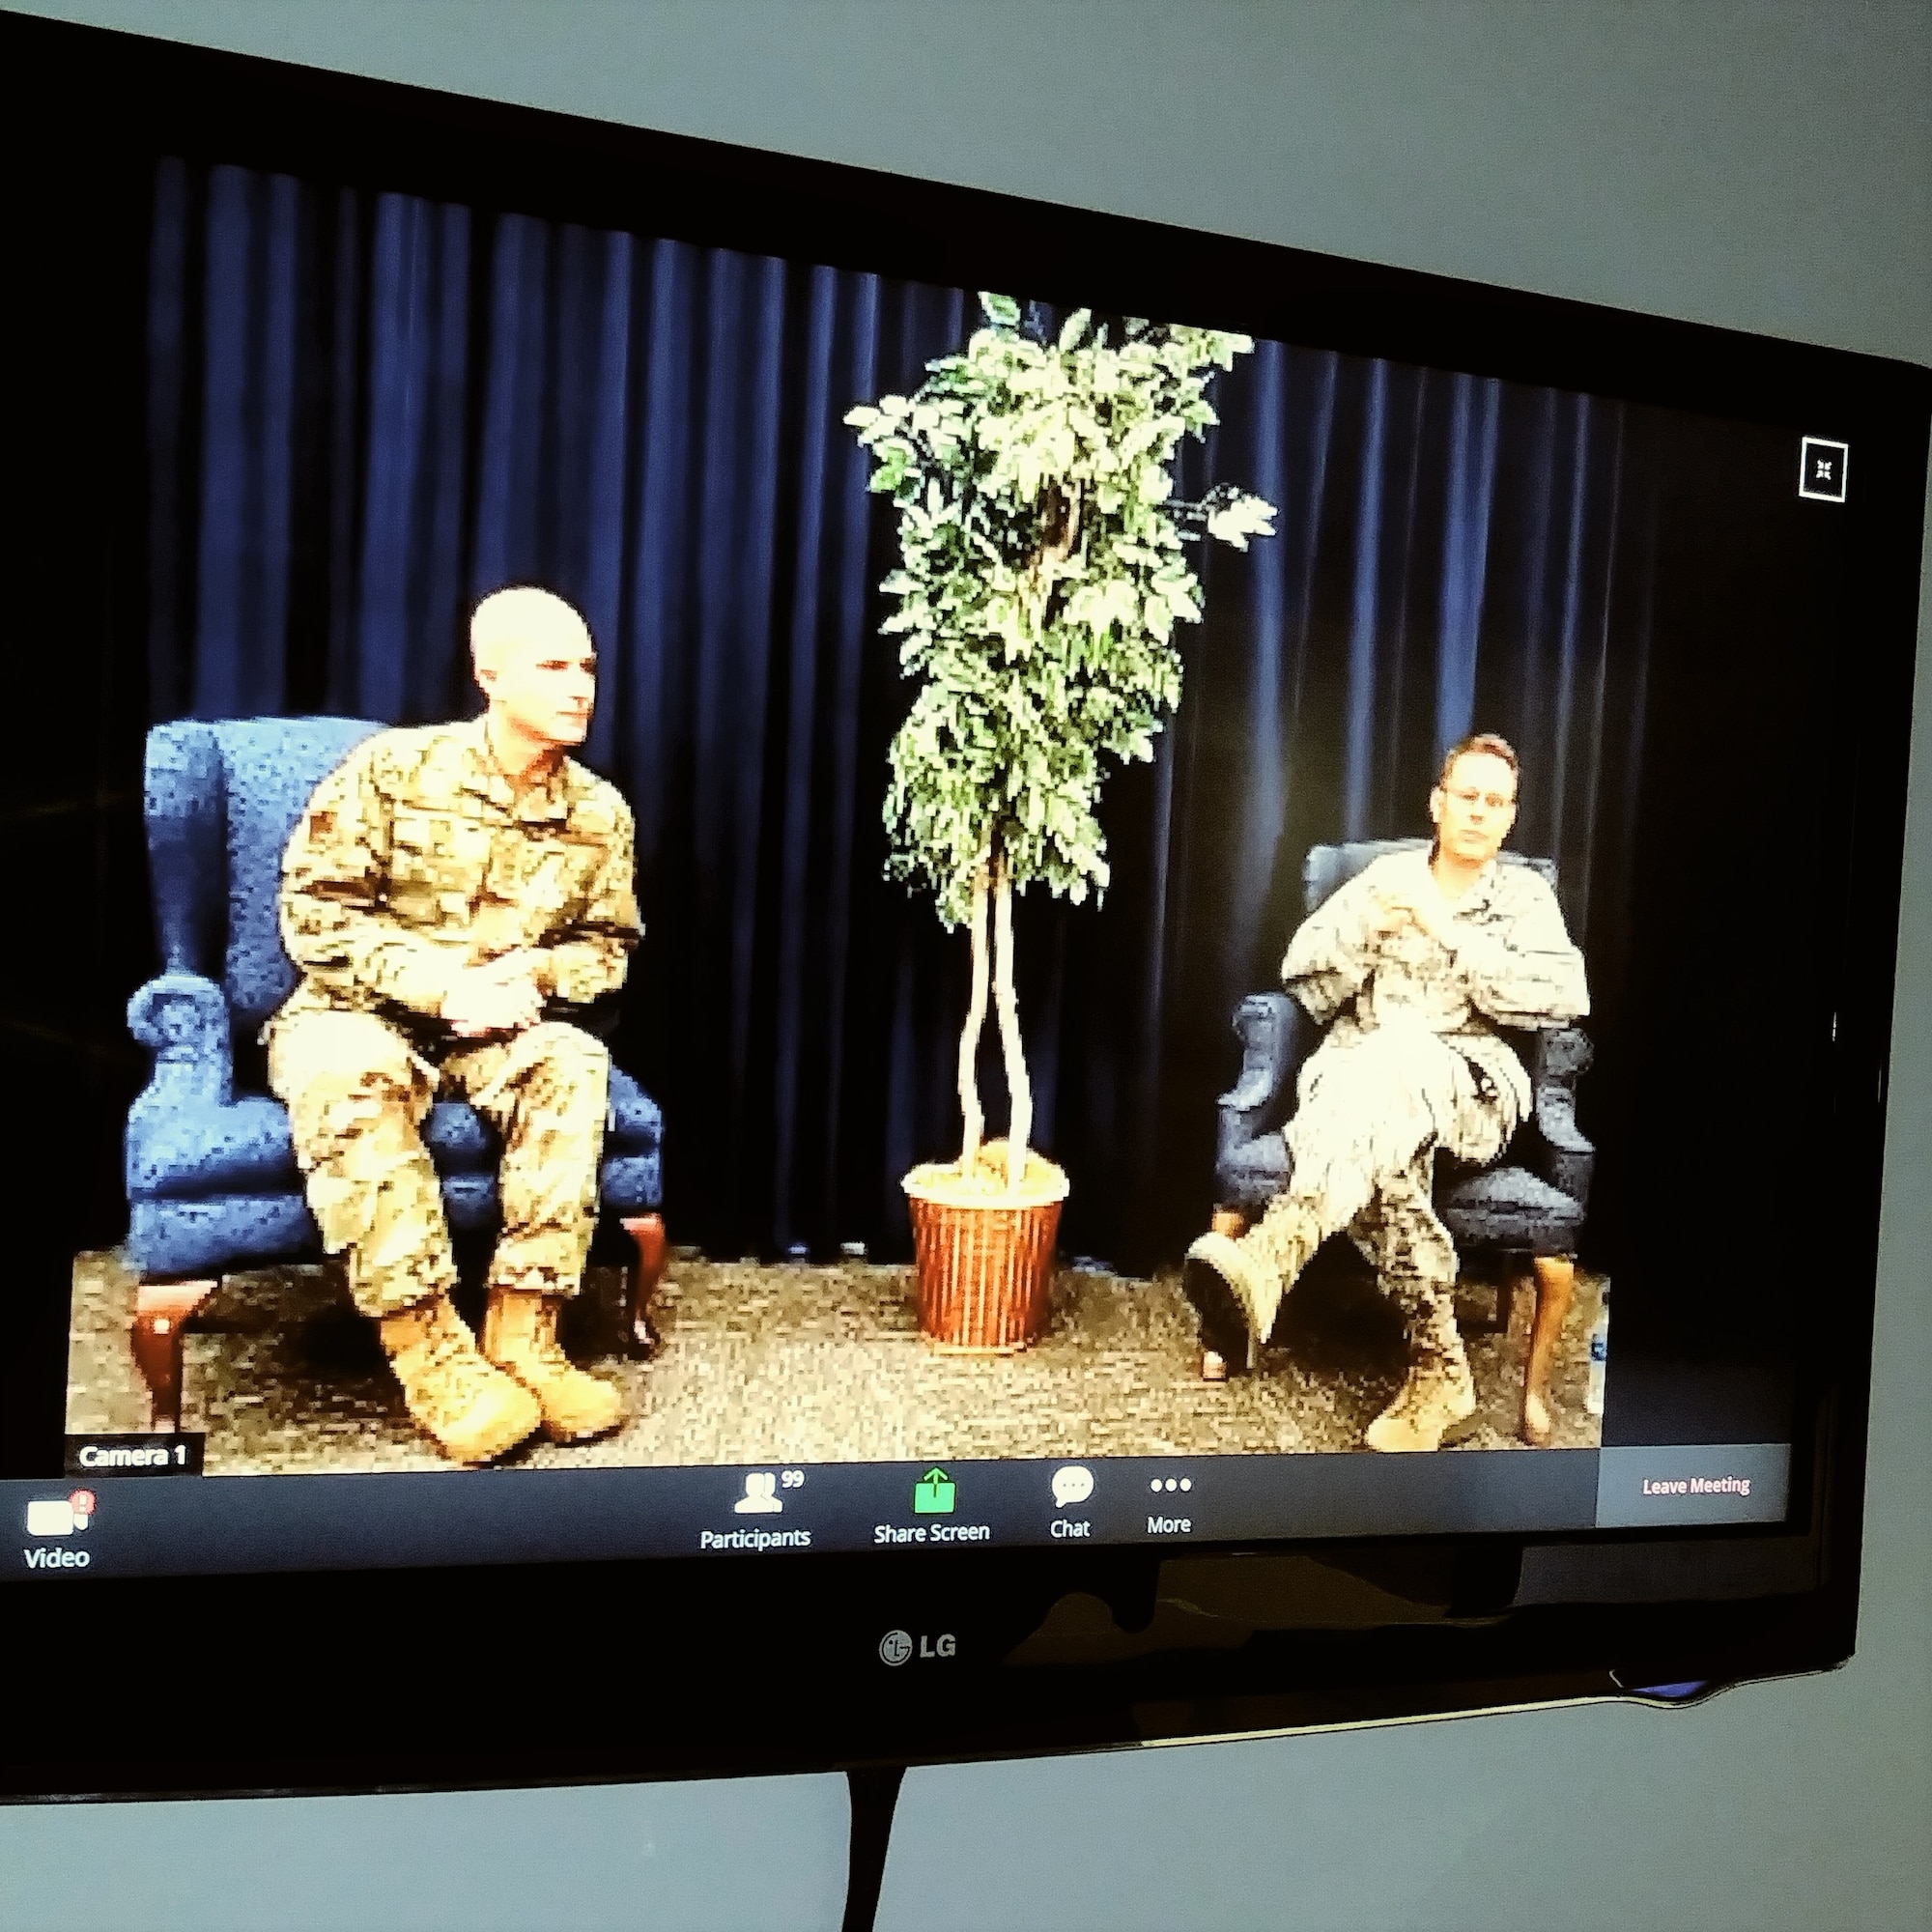 The 940th Air Refueling Wing watched the Zoom question and answer session throughout the headquarters building.